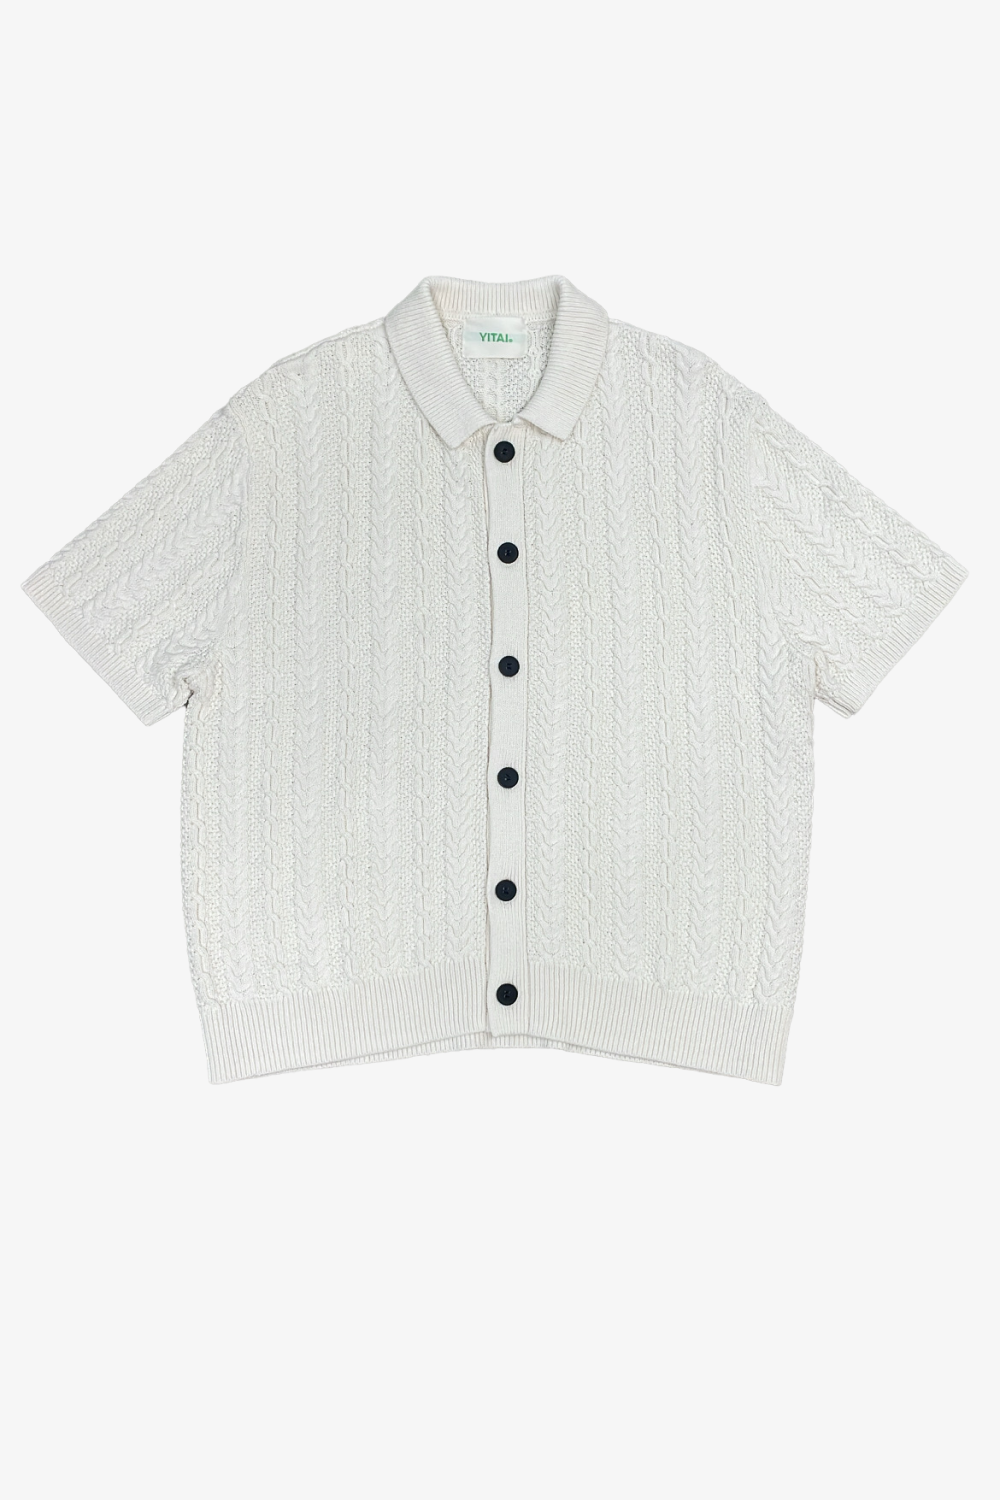 Ivory Cable Knit Button-Up Shirt